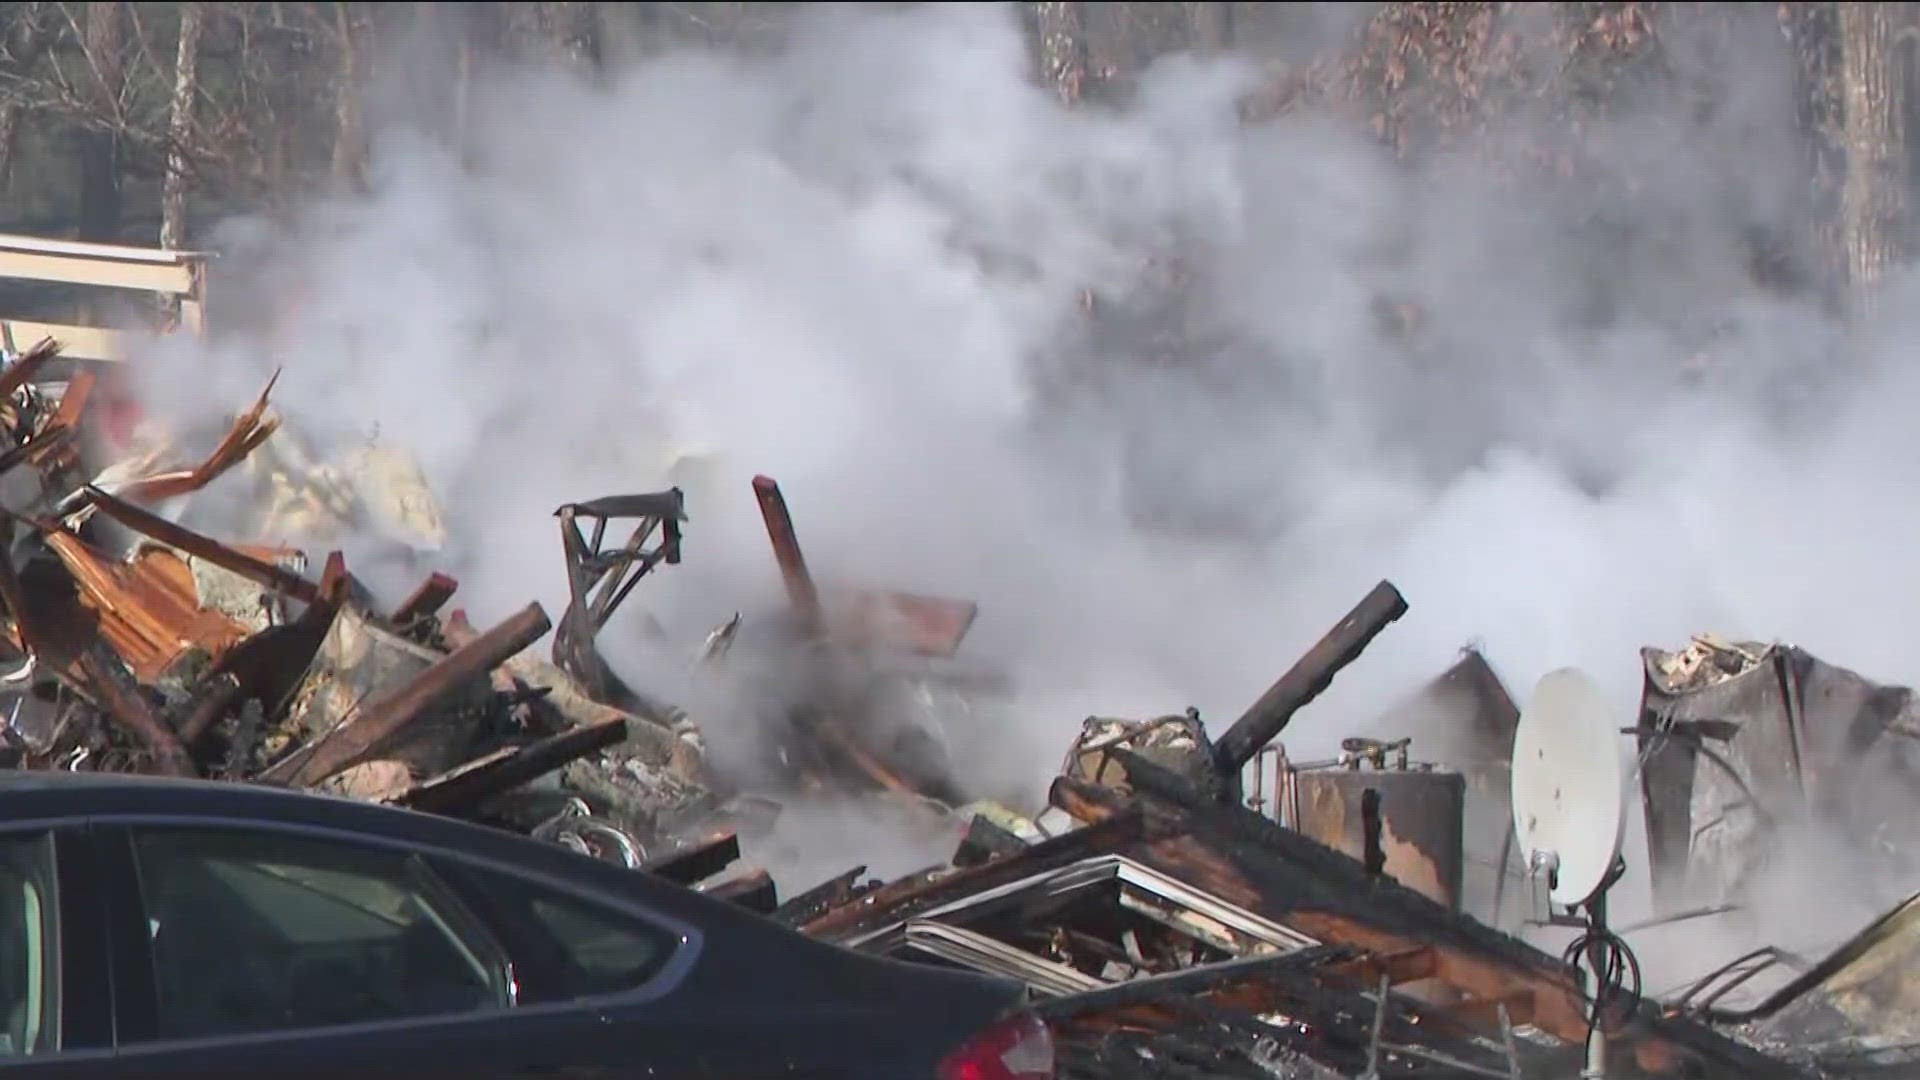 The ban means people and businesses can't burn yard and land-clearing debris.